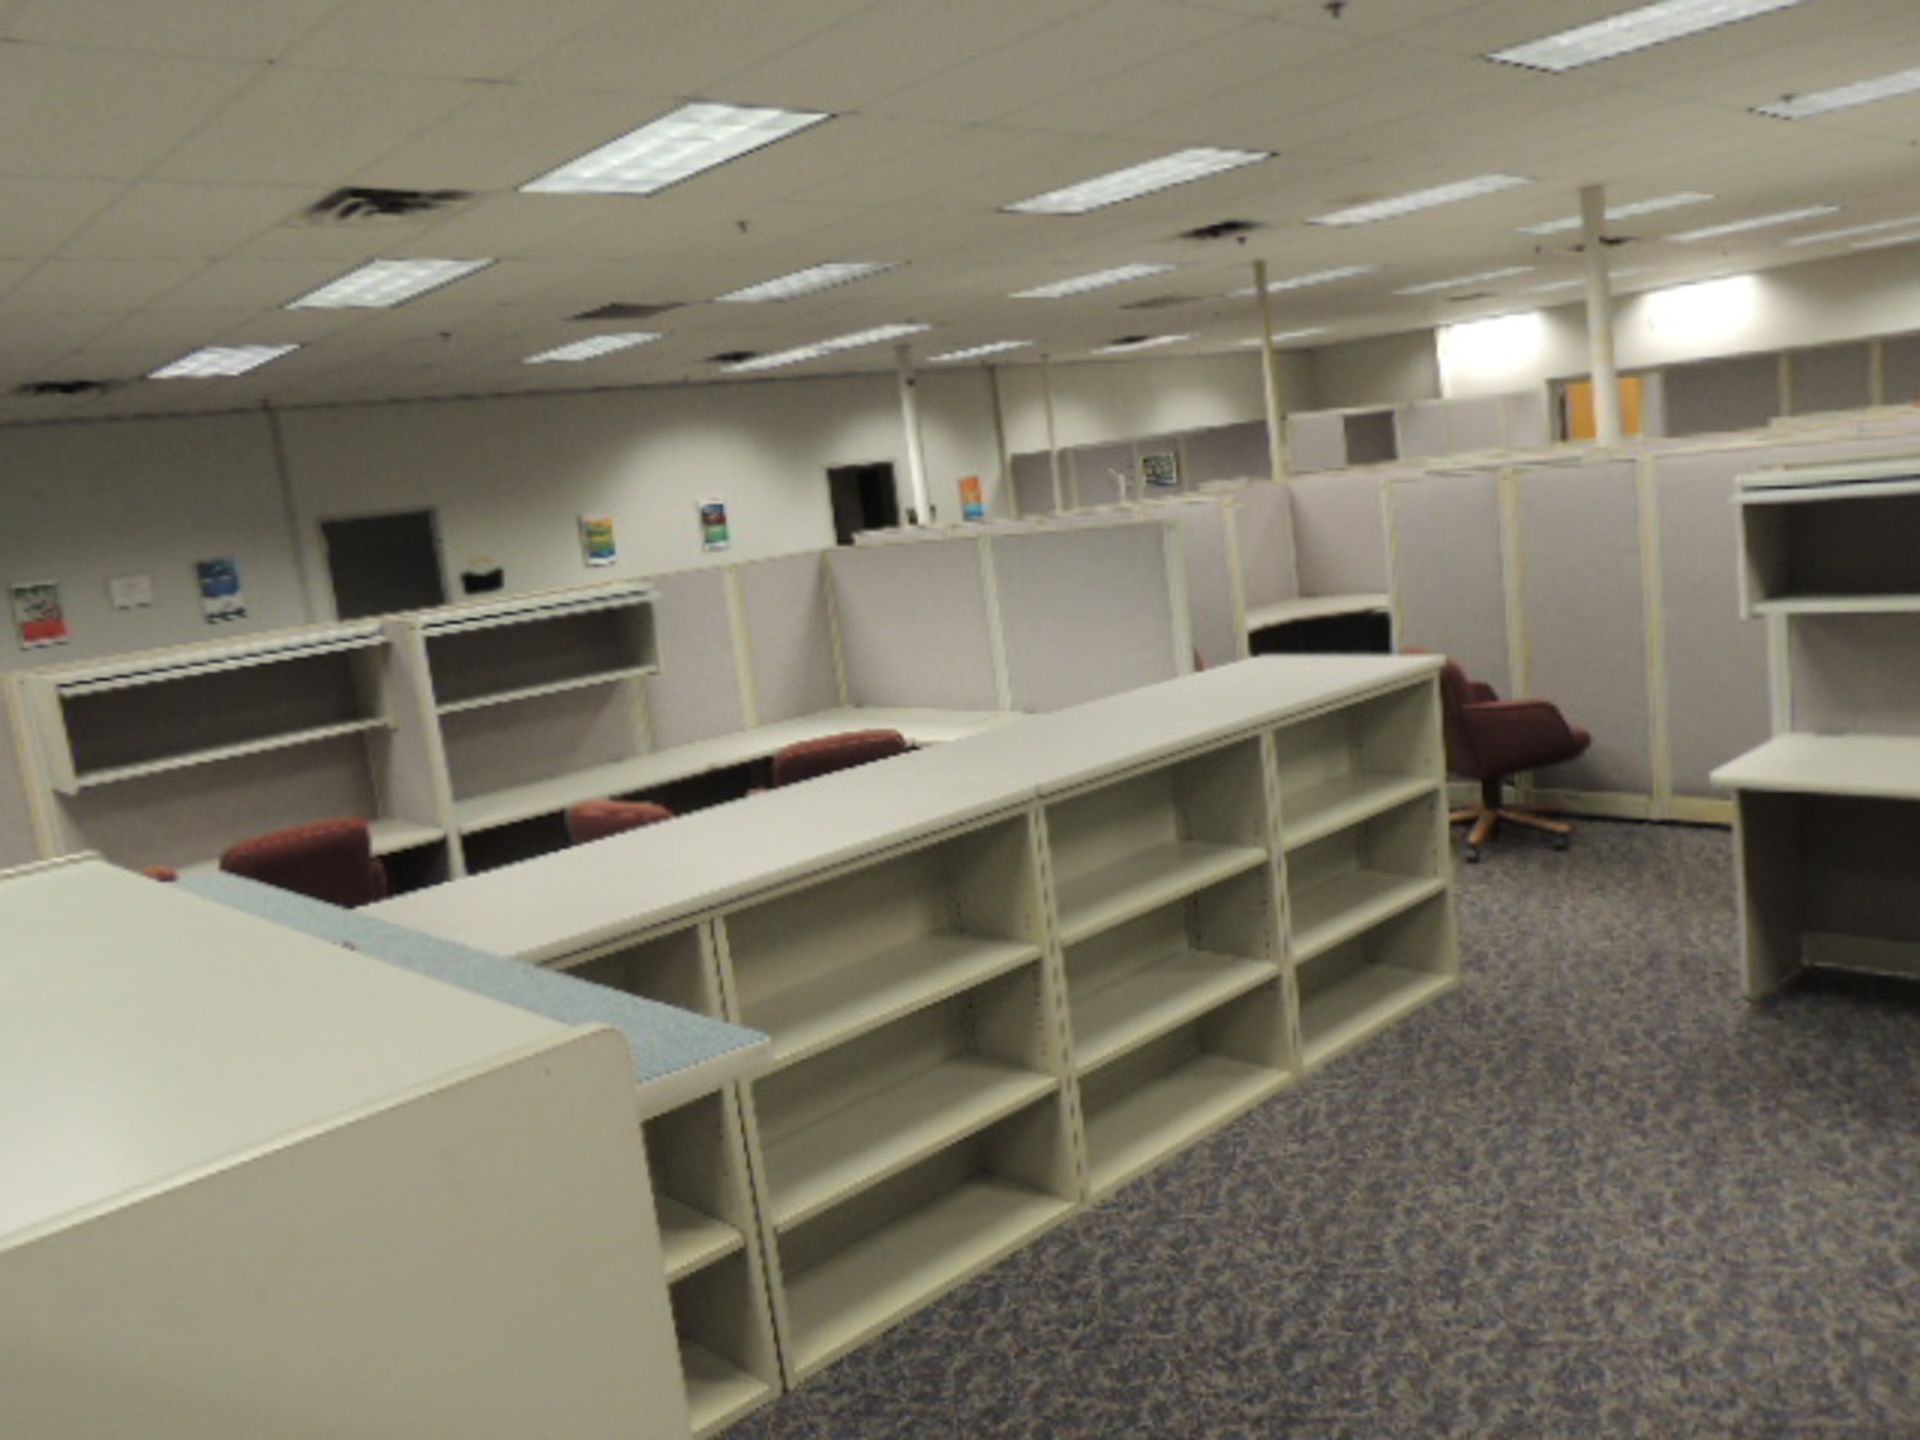 Office Cubicles & Contents. Lot: (8) offices w/ wooden and metal desks, file cabinets and lateral - Image 42 of 47